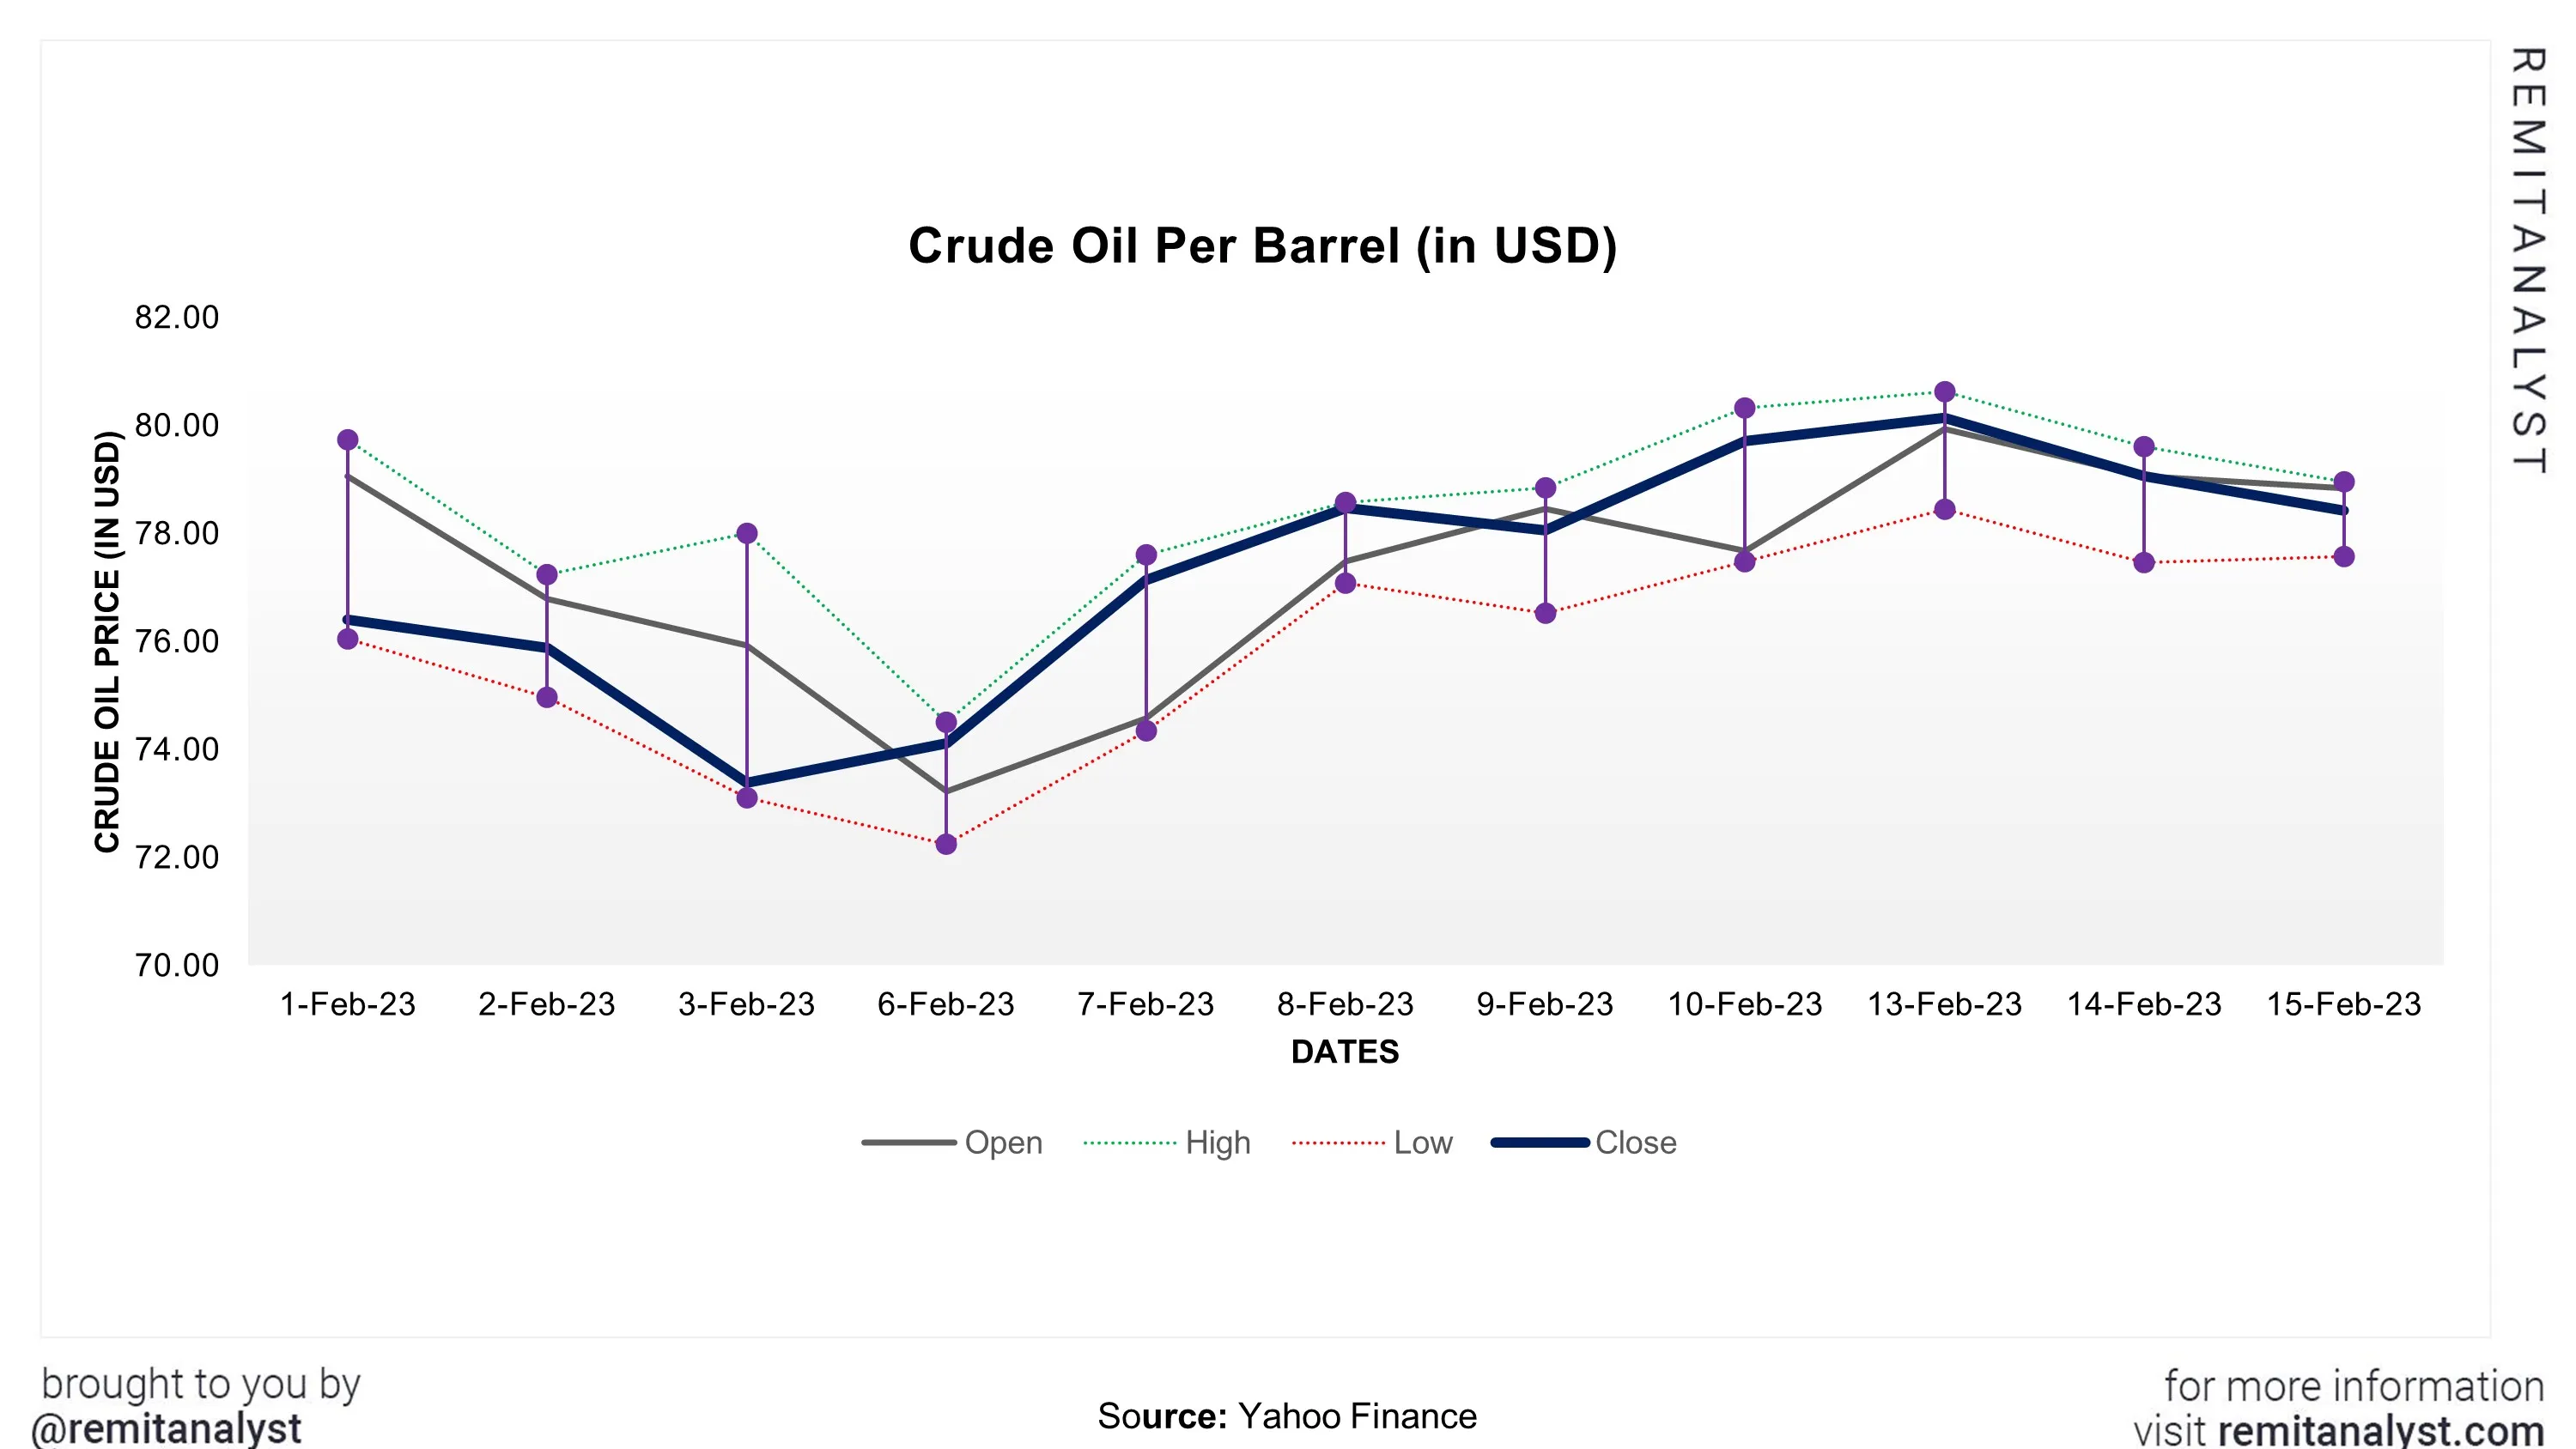 crude-oil-prices-from-1-feb-2023-to-15-feb-2023